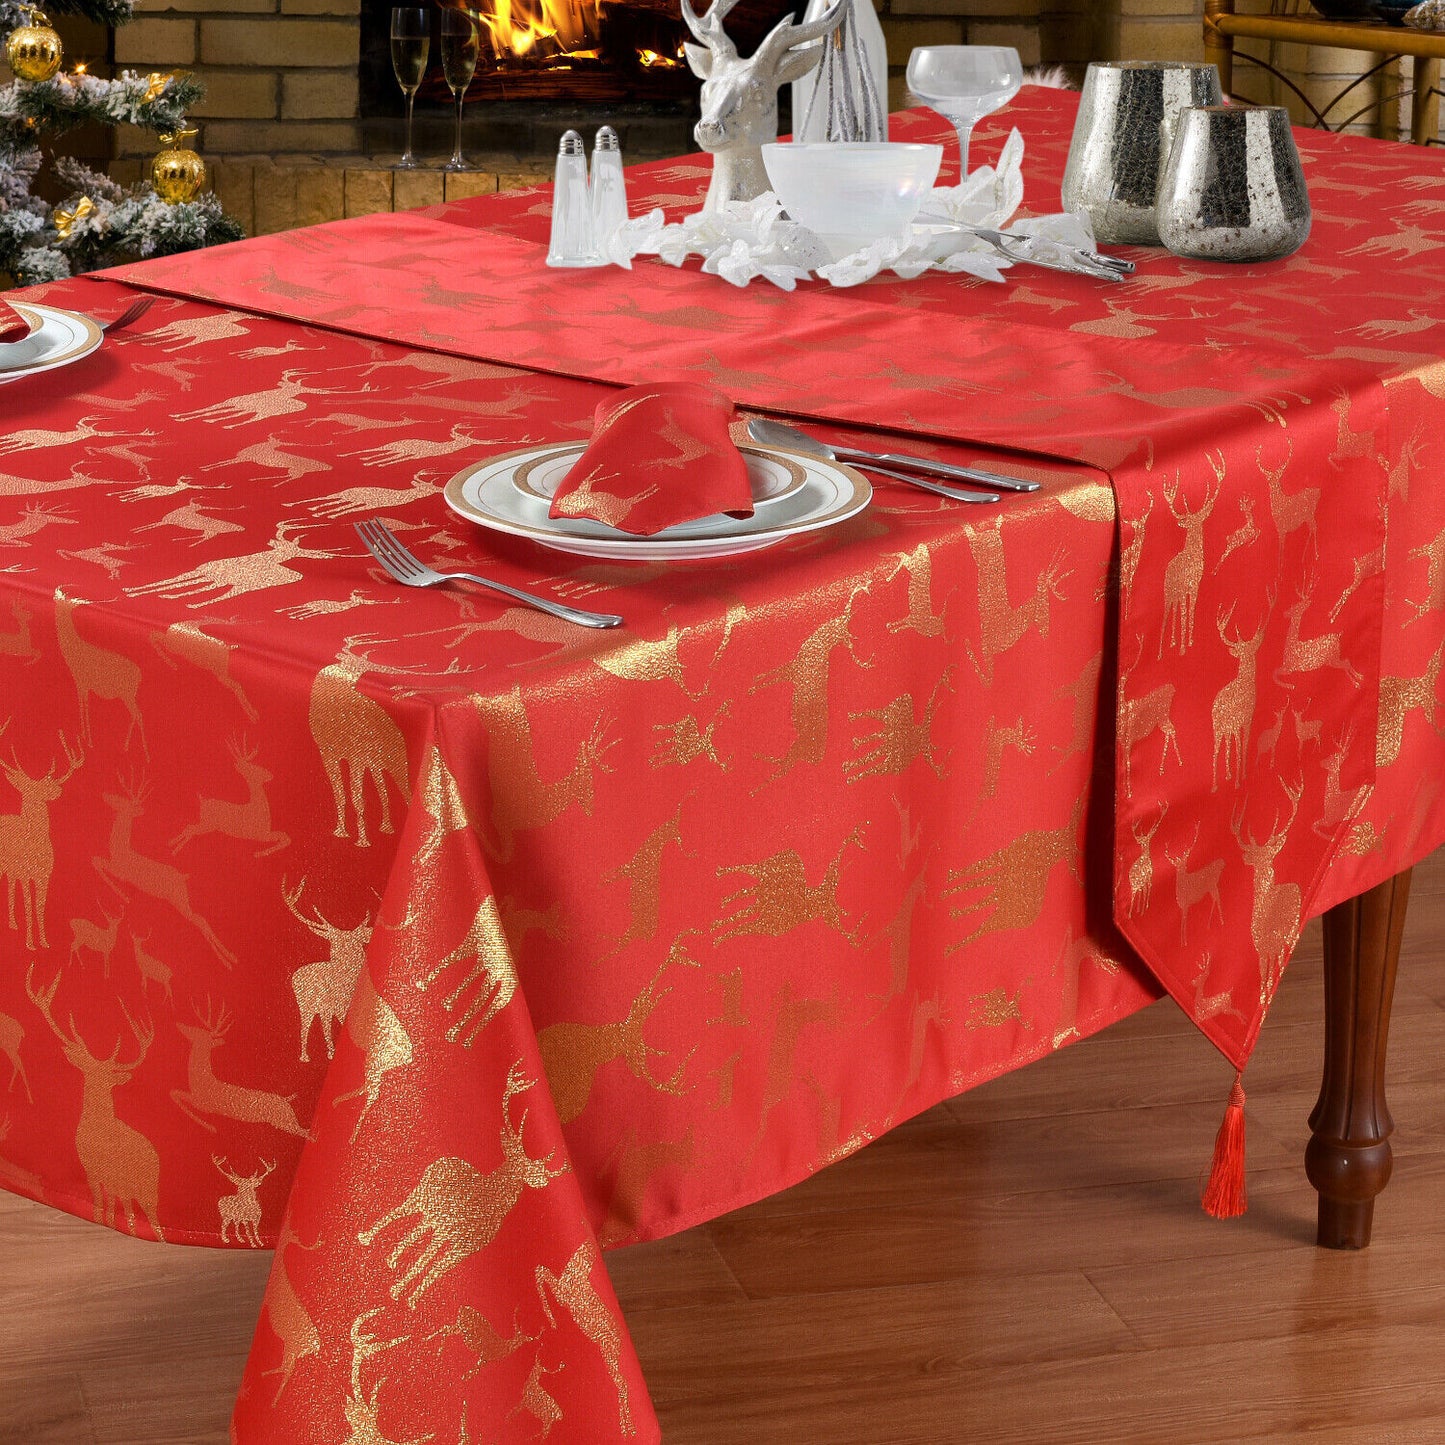 Large Stag Deer Red Gold 70" x 90" Oblong Tablecloth 6 - 8 Place Setting Festive Dining